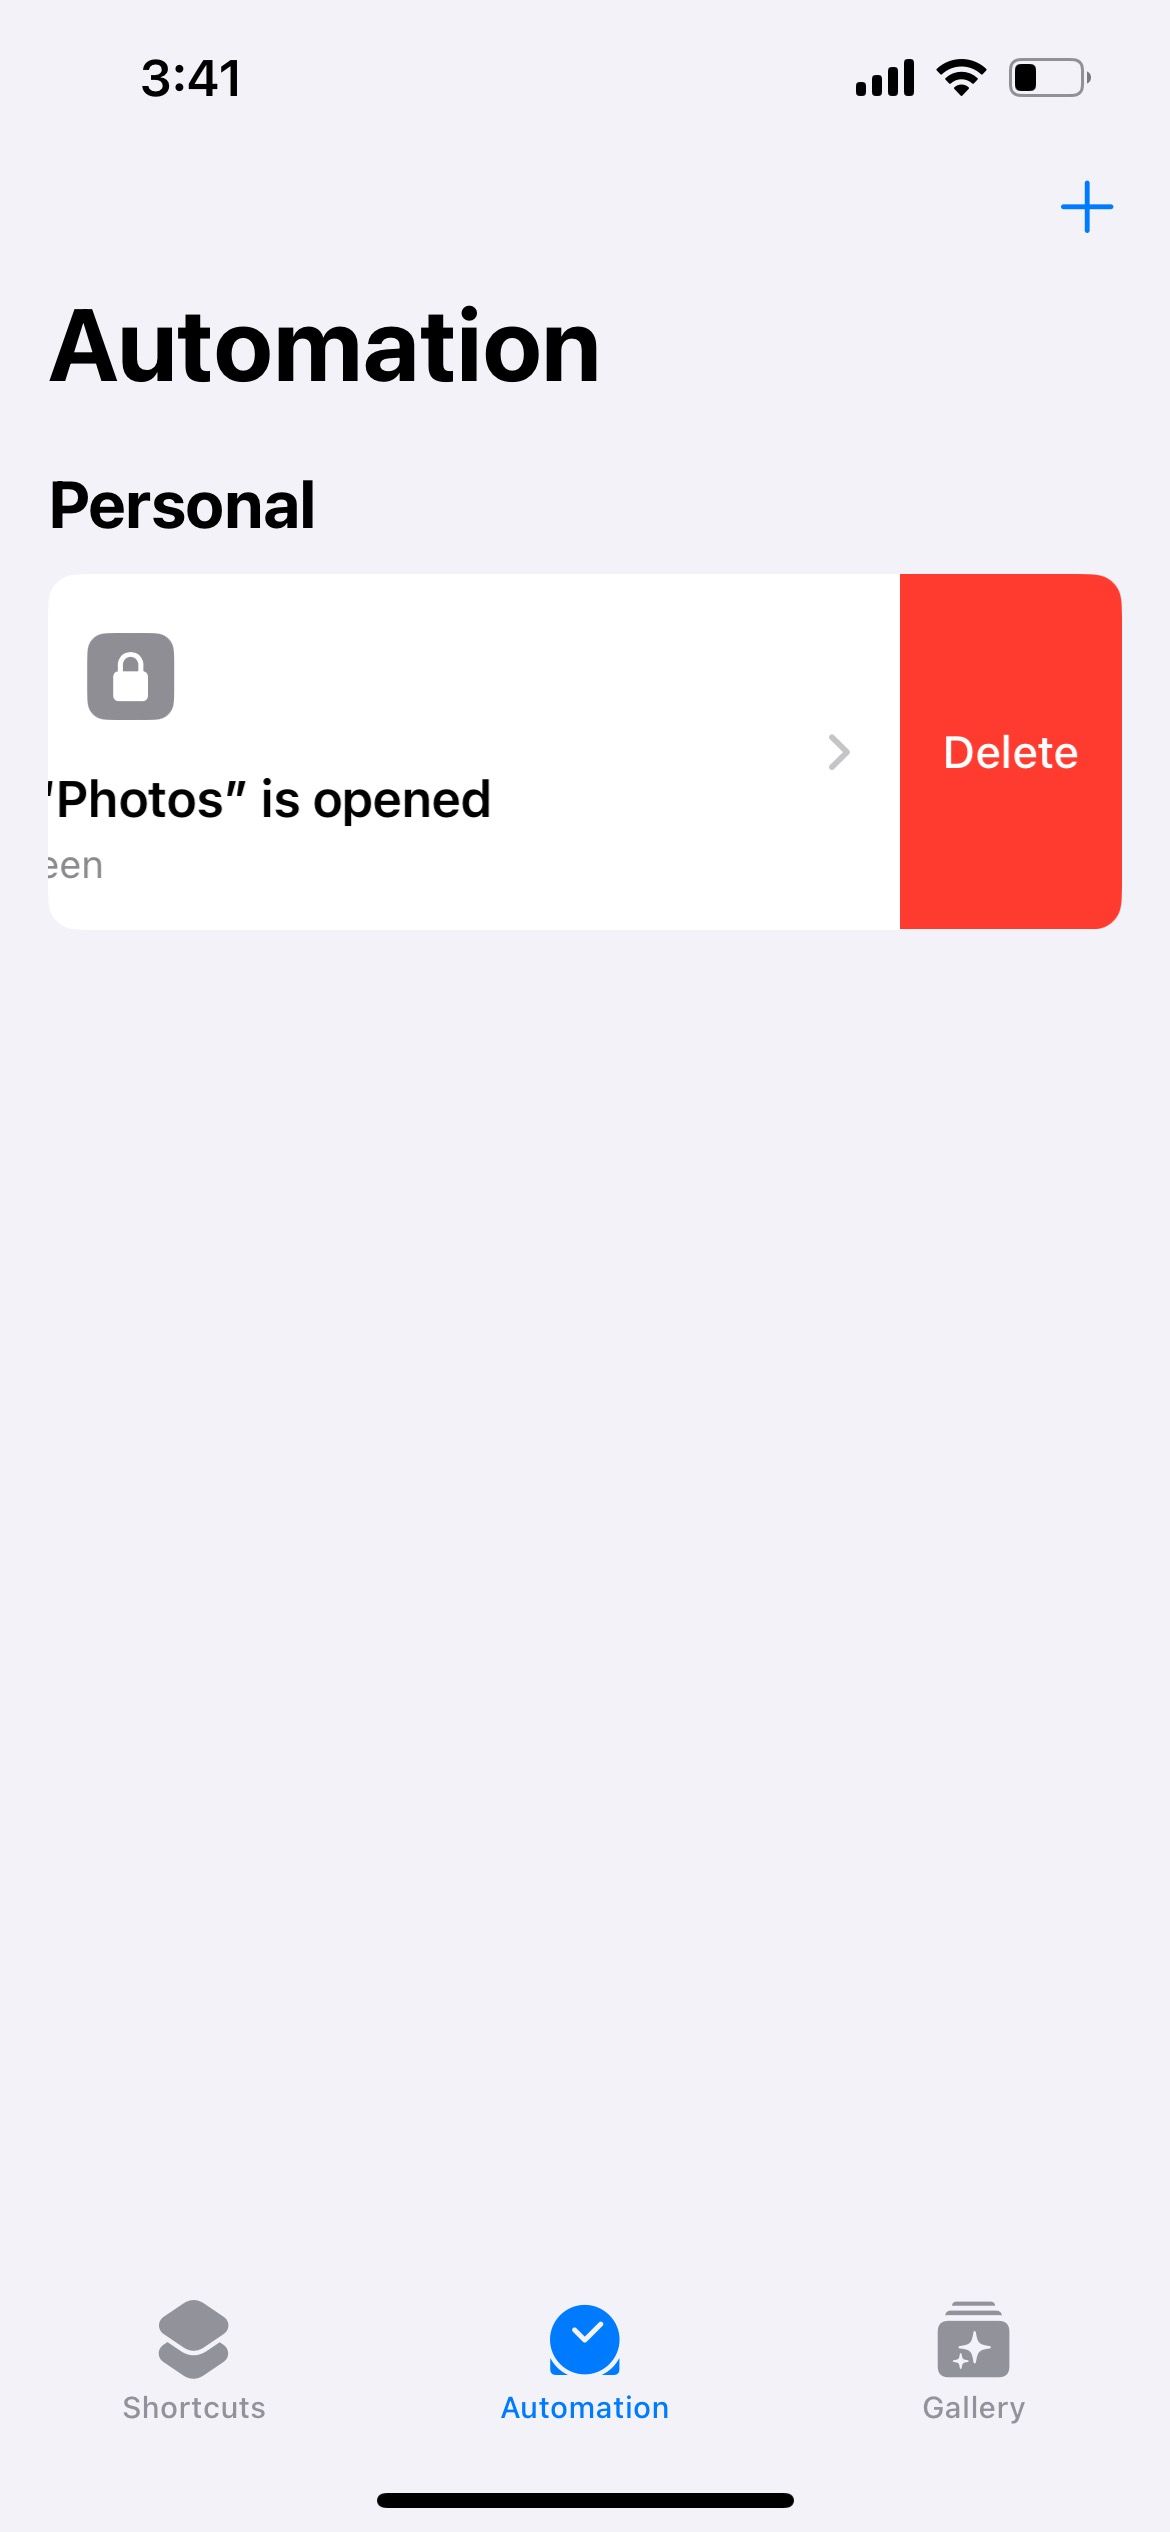 delete automation in iphone shortcuts app